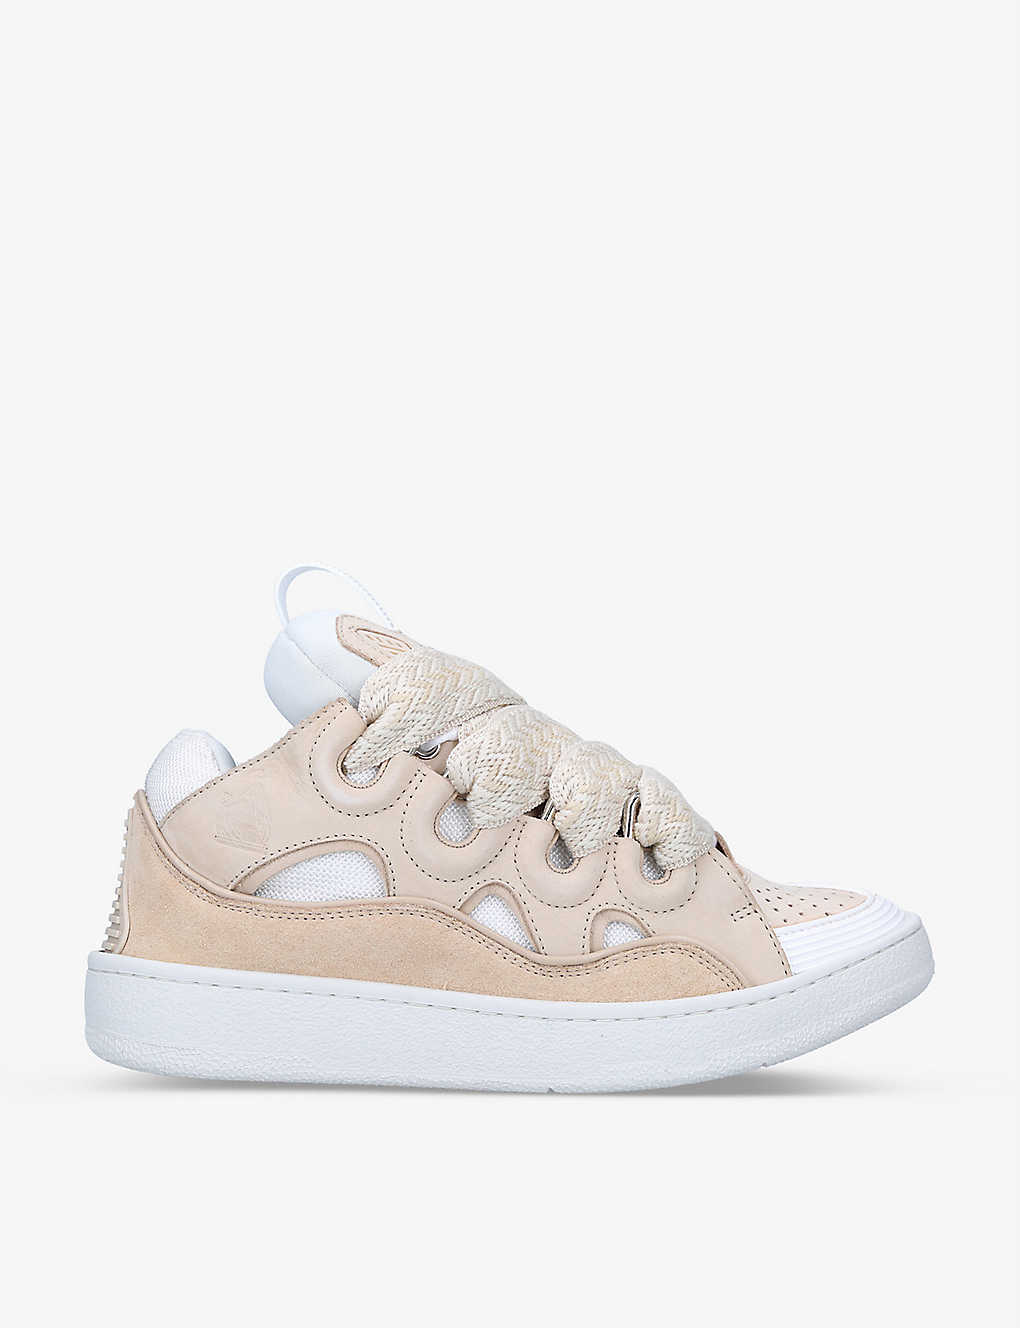 Lanvin Women's Beige Curb Lace-up Leather, Suede And Mesh Low-top Trainers